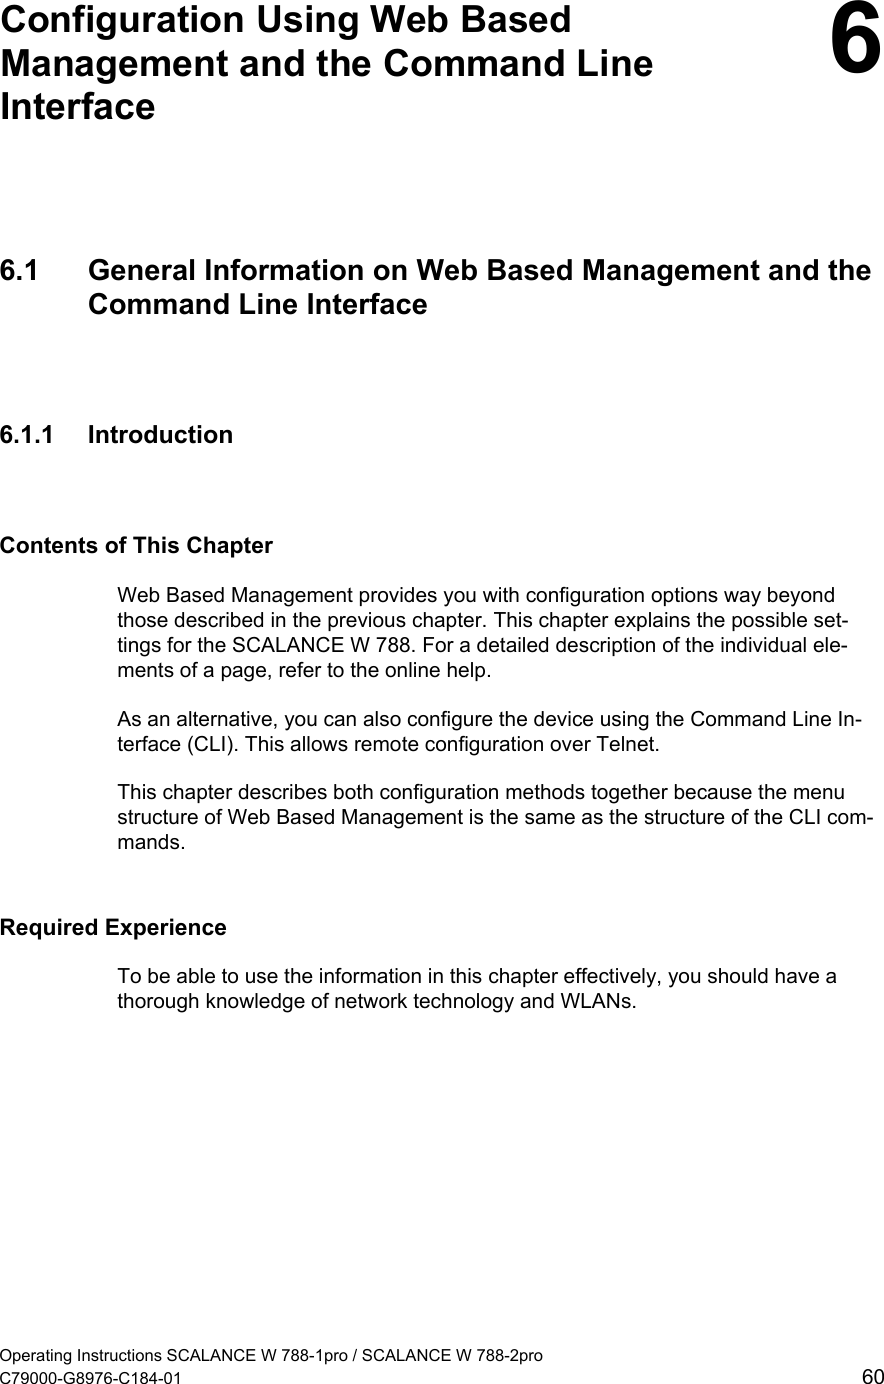   Configuration Using Web Based Management and the Command Line Interface  66.1  General Information on Web Based Management and the Command Line Interface 6.1.1 Introduction Contents of This Chapter Web Based Management provides you with configuration options way beyond those described in the previous chapter. This chapter explains the possible set-tings for the SCALANCE W 788. For a detailed description of the individual ele-ments of a page, refer to the online help. As an alternative, you can also configure the device using the Command Line In-terface (CLI). This allows remote configuration over Telnet. This chapter describes both configuration methods together because the menu structure of Web Based Management is the same as the structure of the CLI com-mands. Required Experience To be able to use the information in this chapter effectively, you should have a thorough knowledge of network technology and WLANs. Operating Instructions SCALANCE W 788-1pro / SCALANCE W 788-2pro C79000-G8976-C184-01  60 